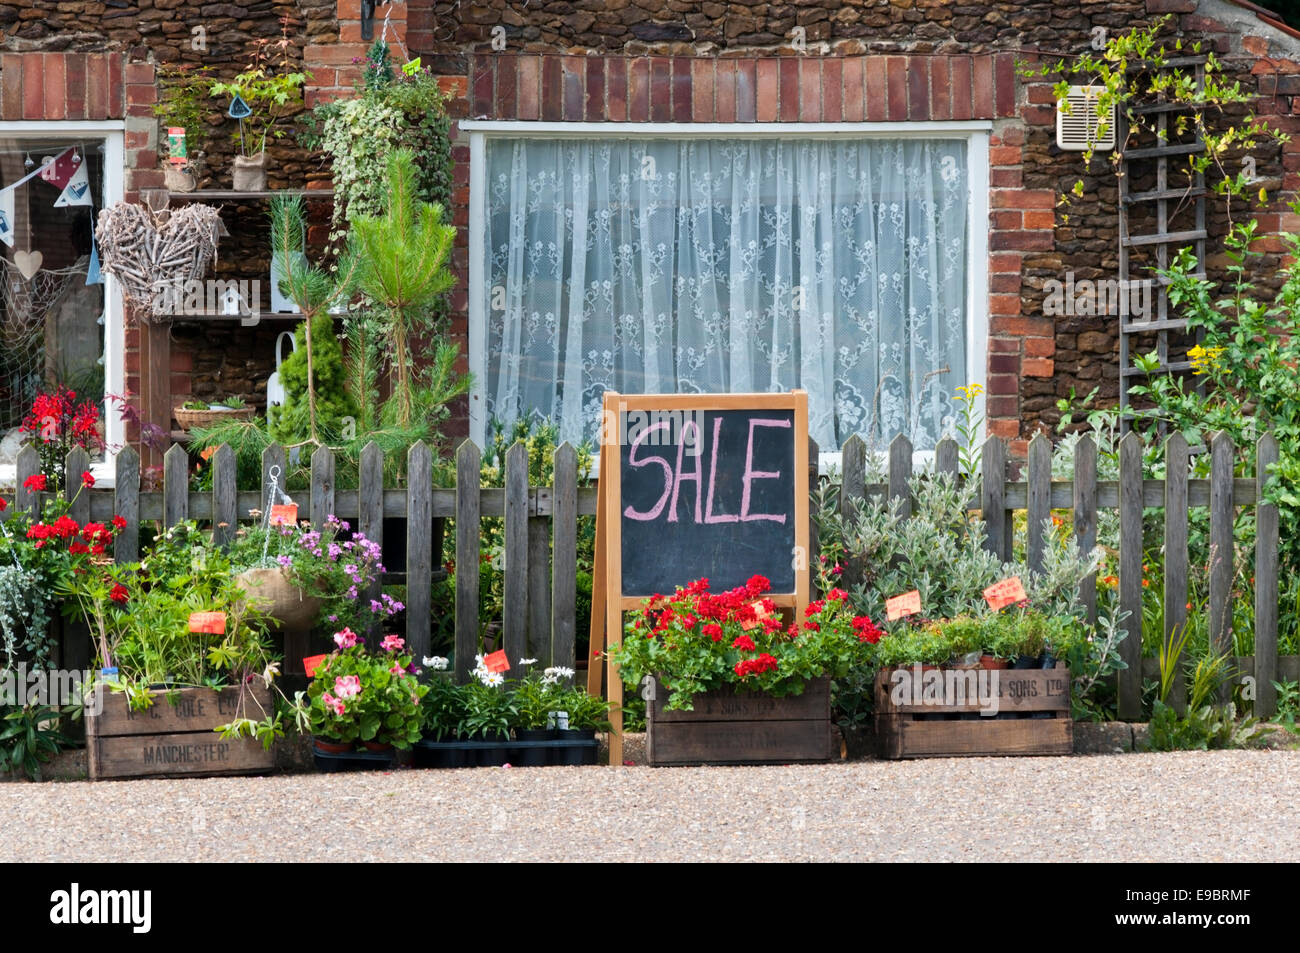 Garden plants for sale outside a Norfolk house. Stock Photo